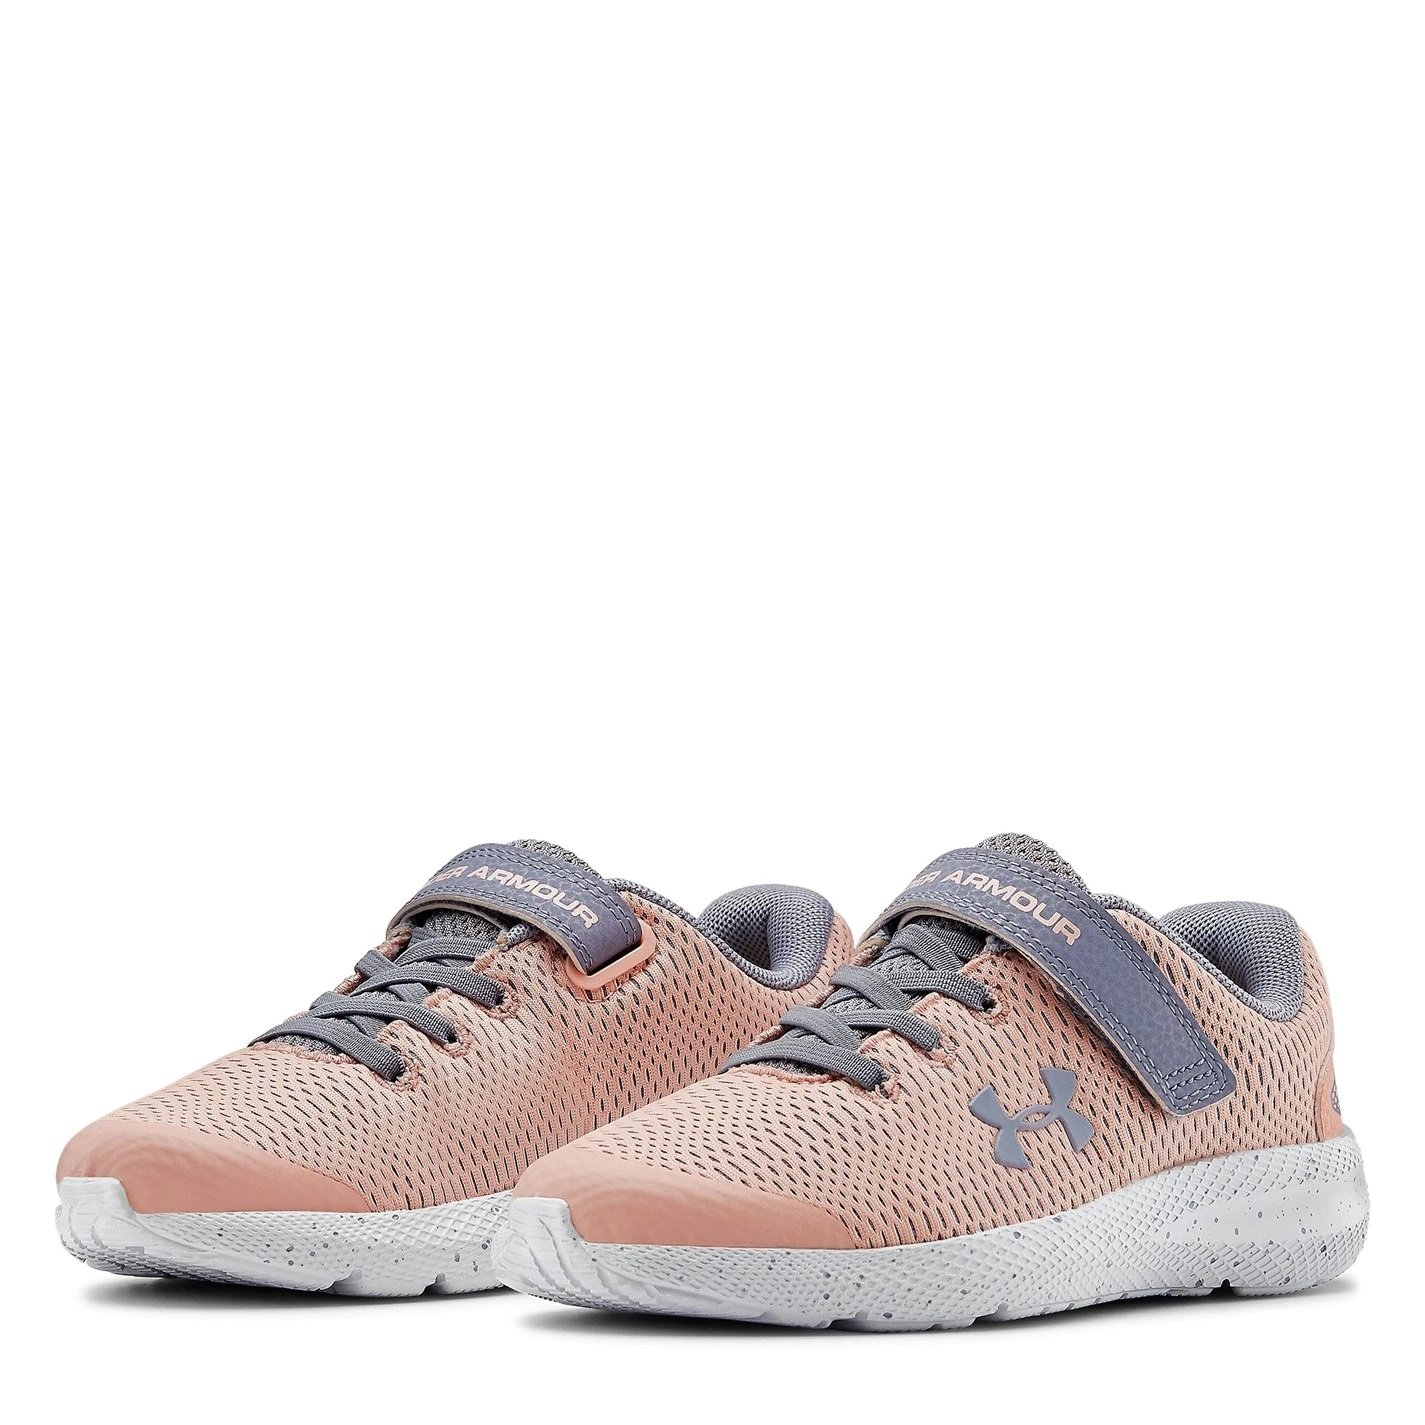 Under Armour Pursuit 2 Junior Shoes in Peach Frost Onyx White.jpg